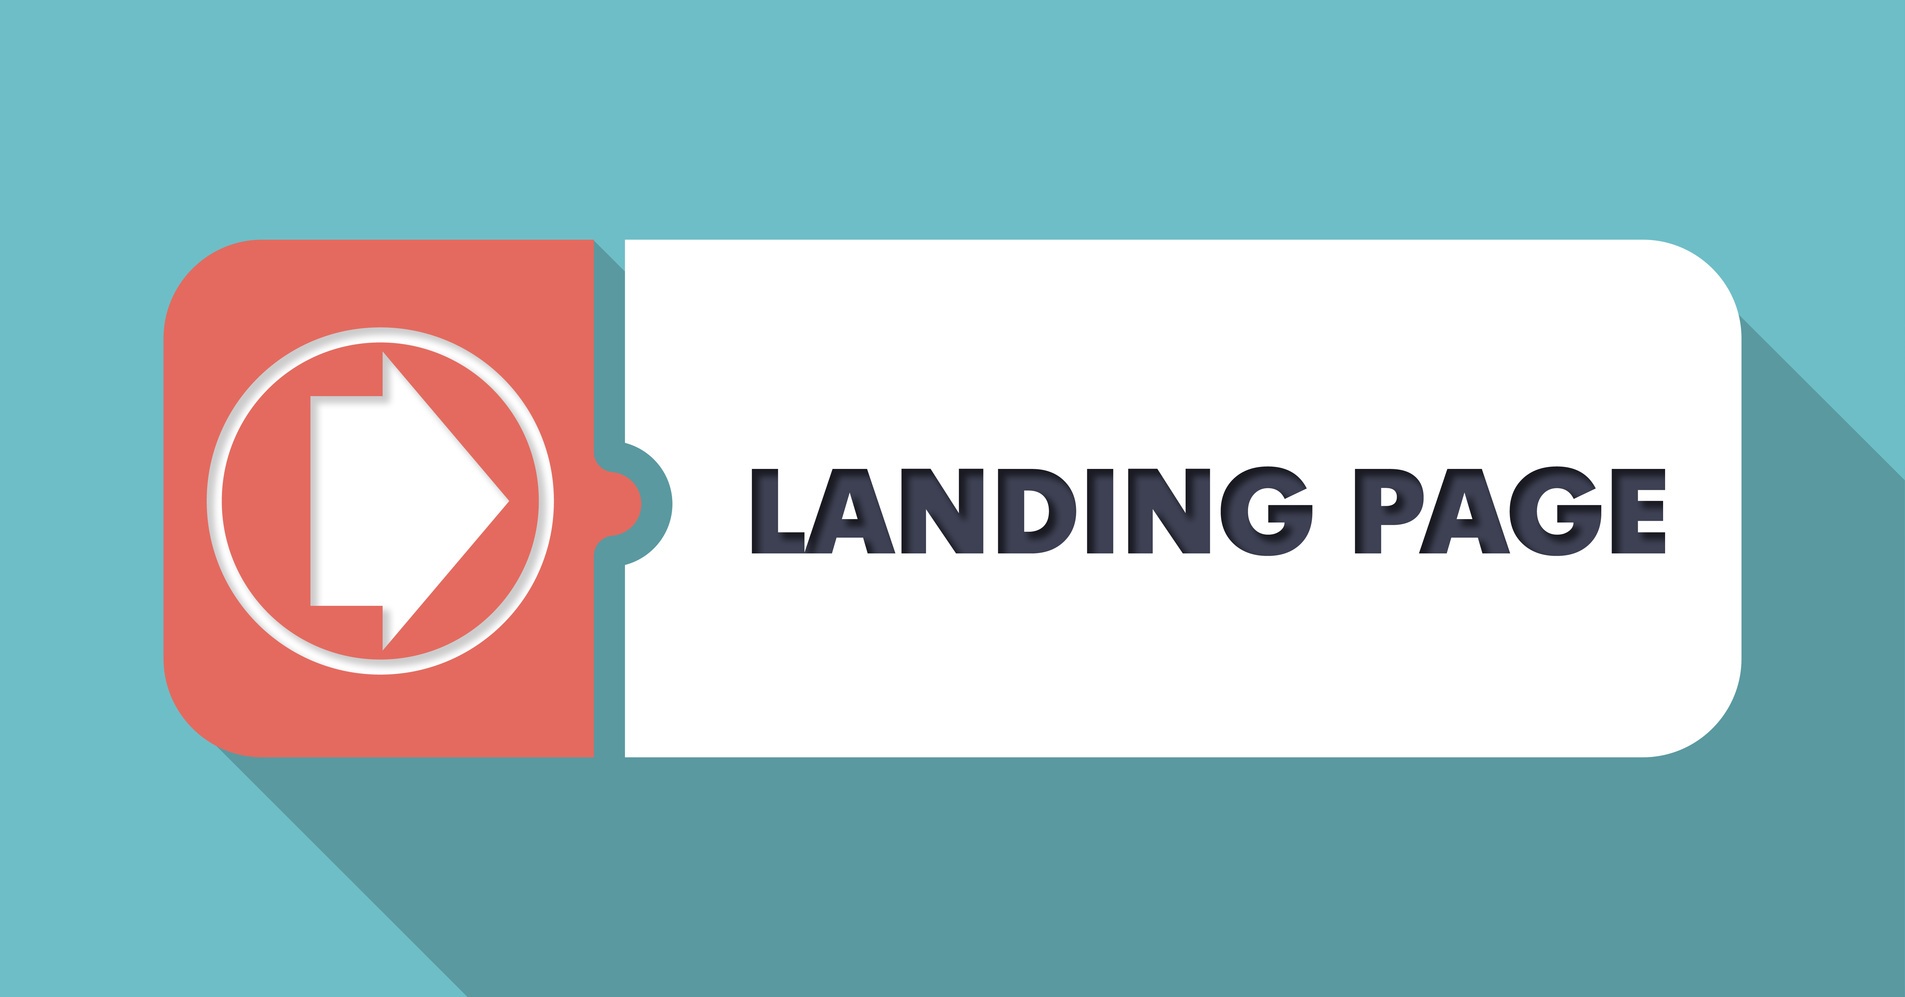 4 Tricks to Improve Lead Conversion on Your Landing Pages